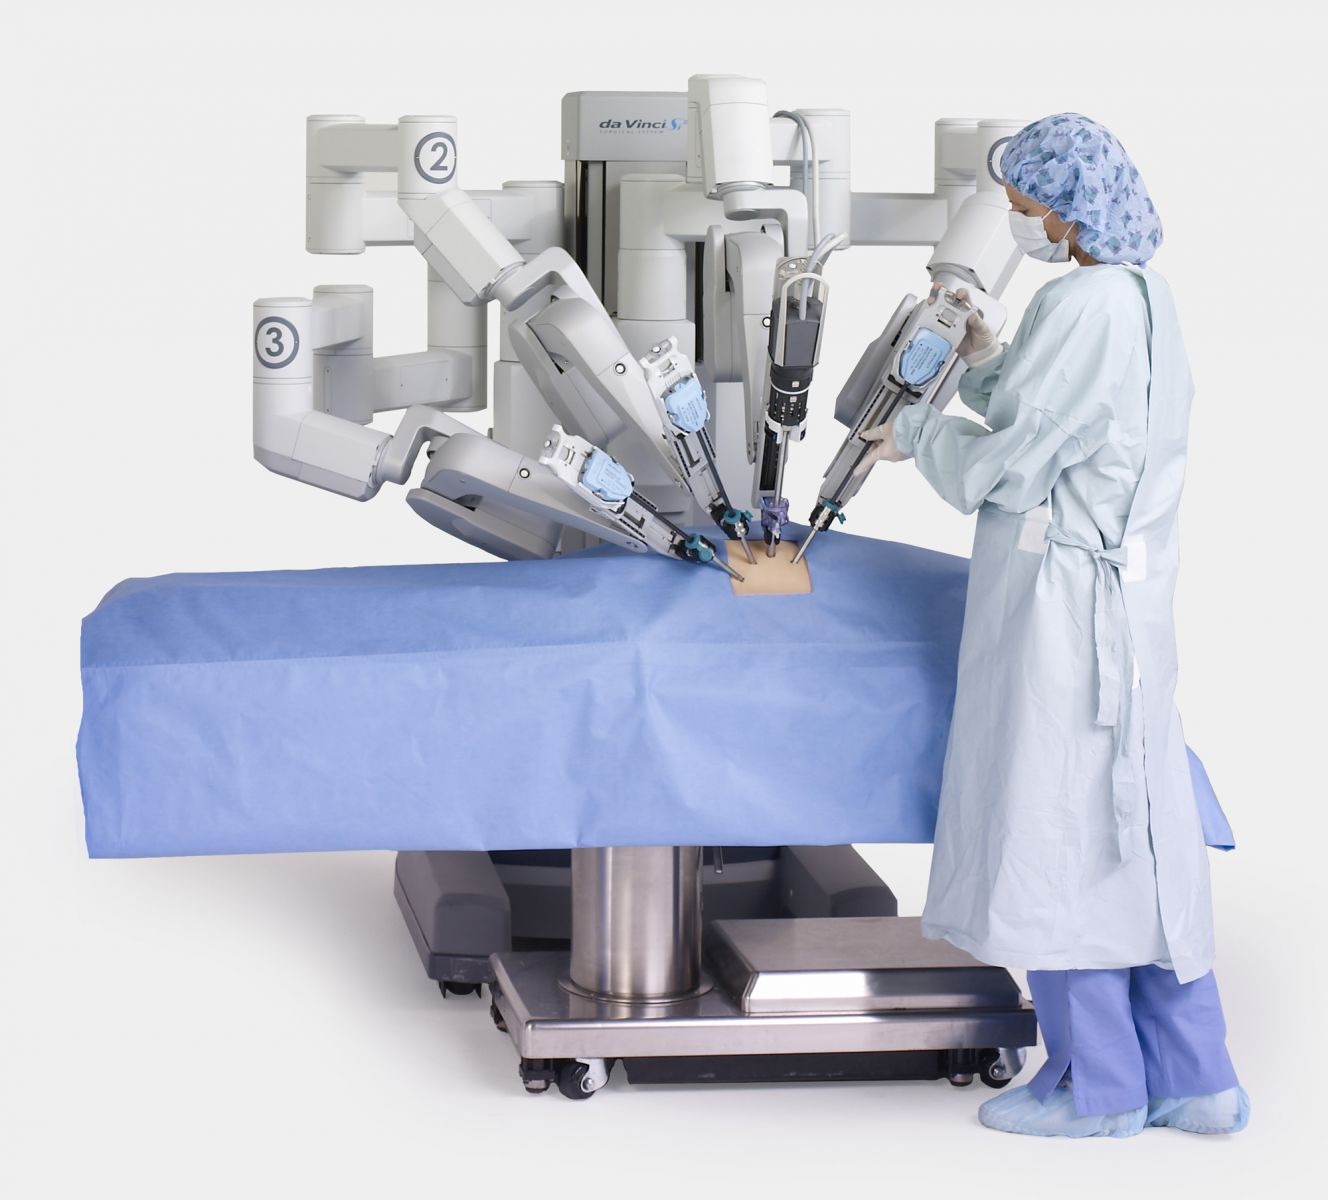 Part of the investment will be used to acquire a Da Vinci Surgical System for Roper St. Francis Berkeley Hospital. (Photo/Provided)